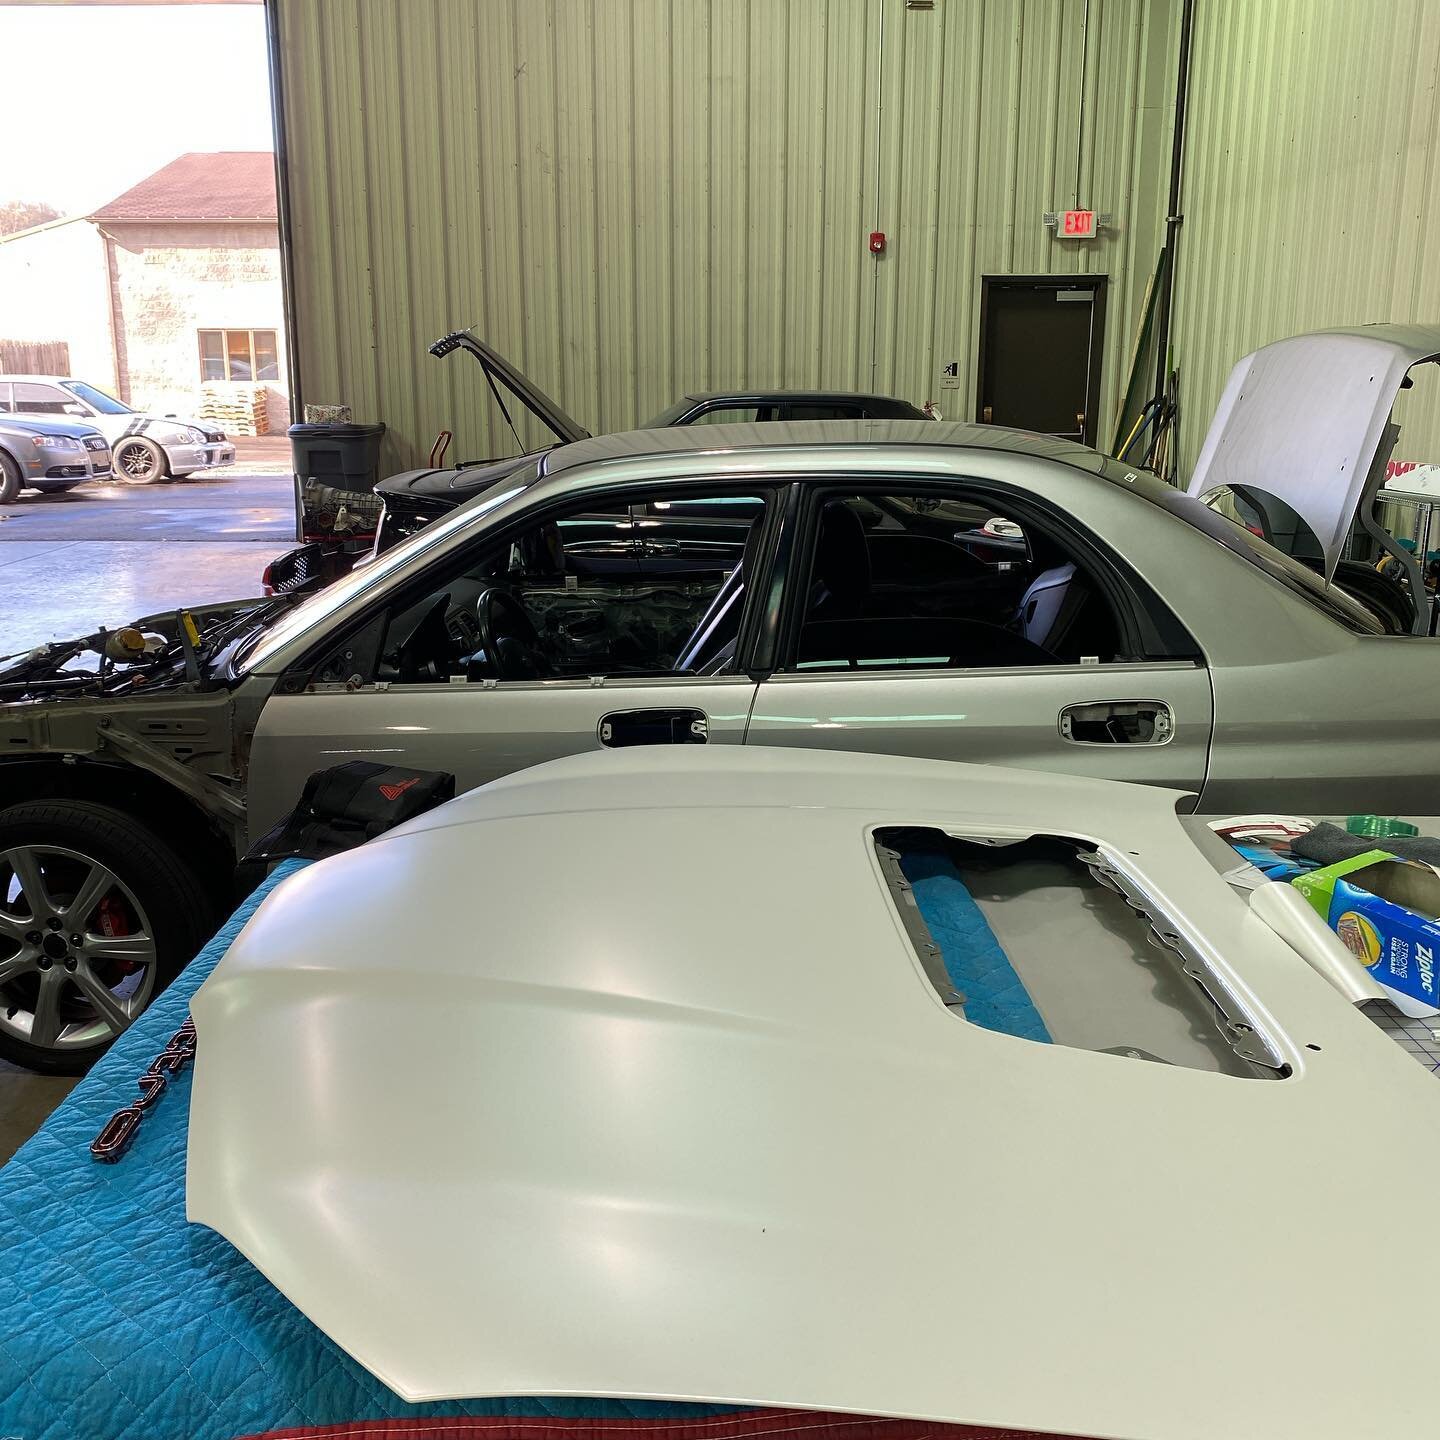 07 WRX come in for a wrap! Going with @averydennison satin Pearl white, stay tuned, this thing is going to look wild when it is done. @wrapinstitute #wrappingcars #pittsburghdetailing #wrappedcars #vinylwraps #wrapinstaller #subaru #wrx #subaruwrx #h